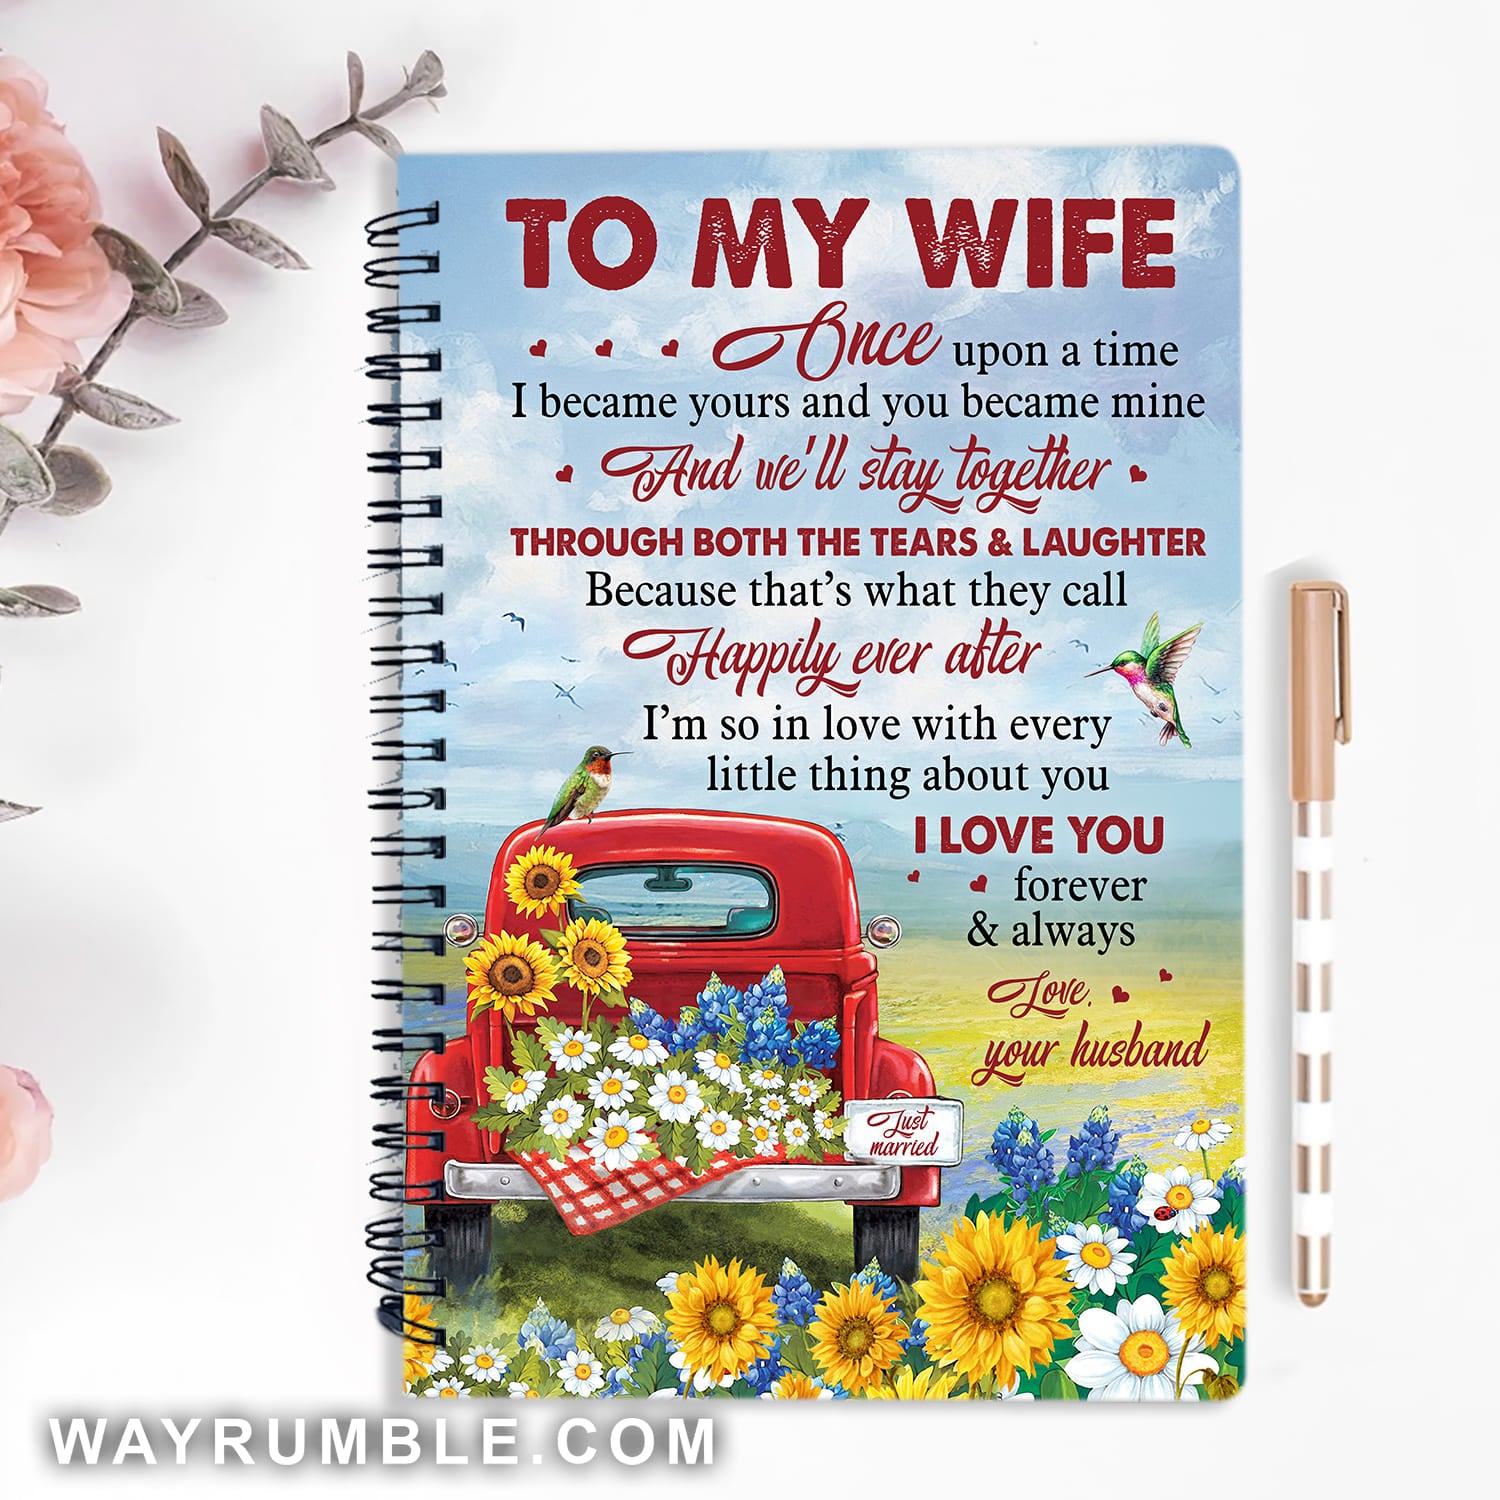 To my wife, Red truck, Flower field, happily ever after - Couple, Countryside landscape, Spiral Journal